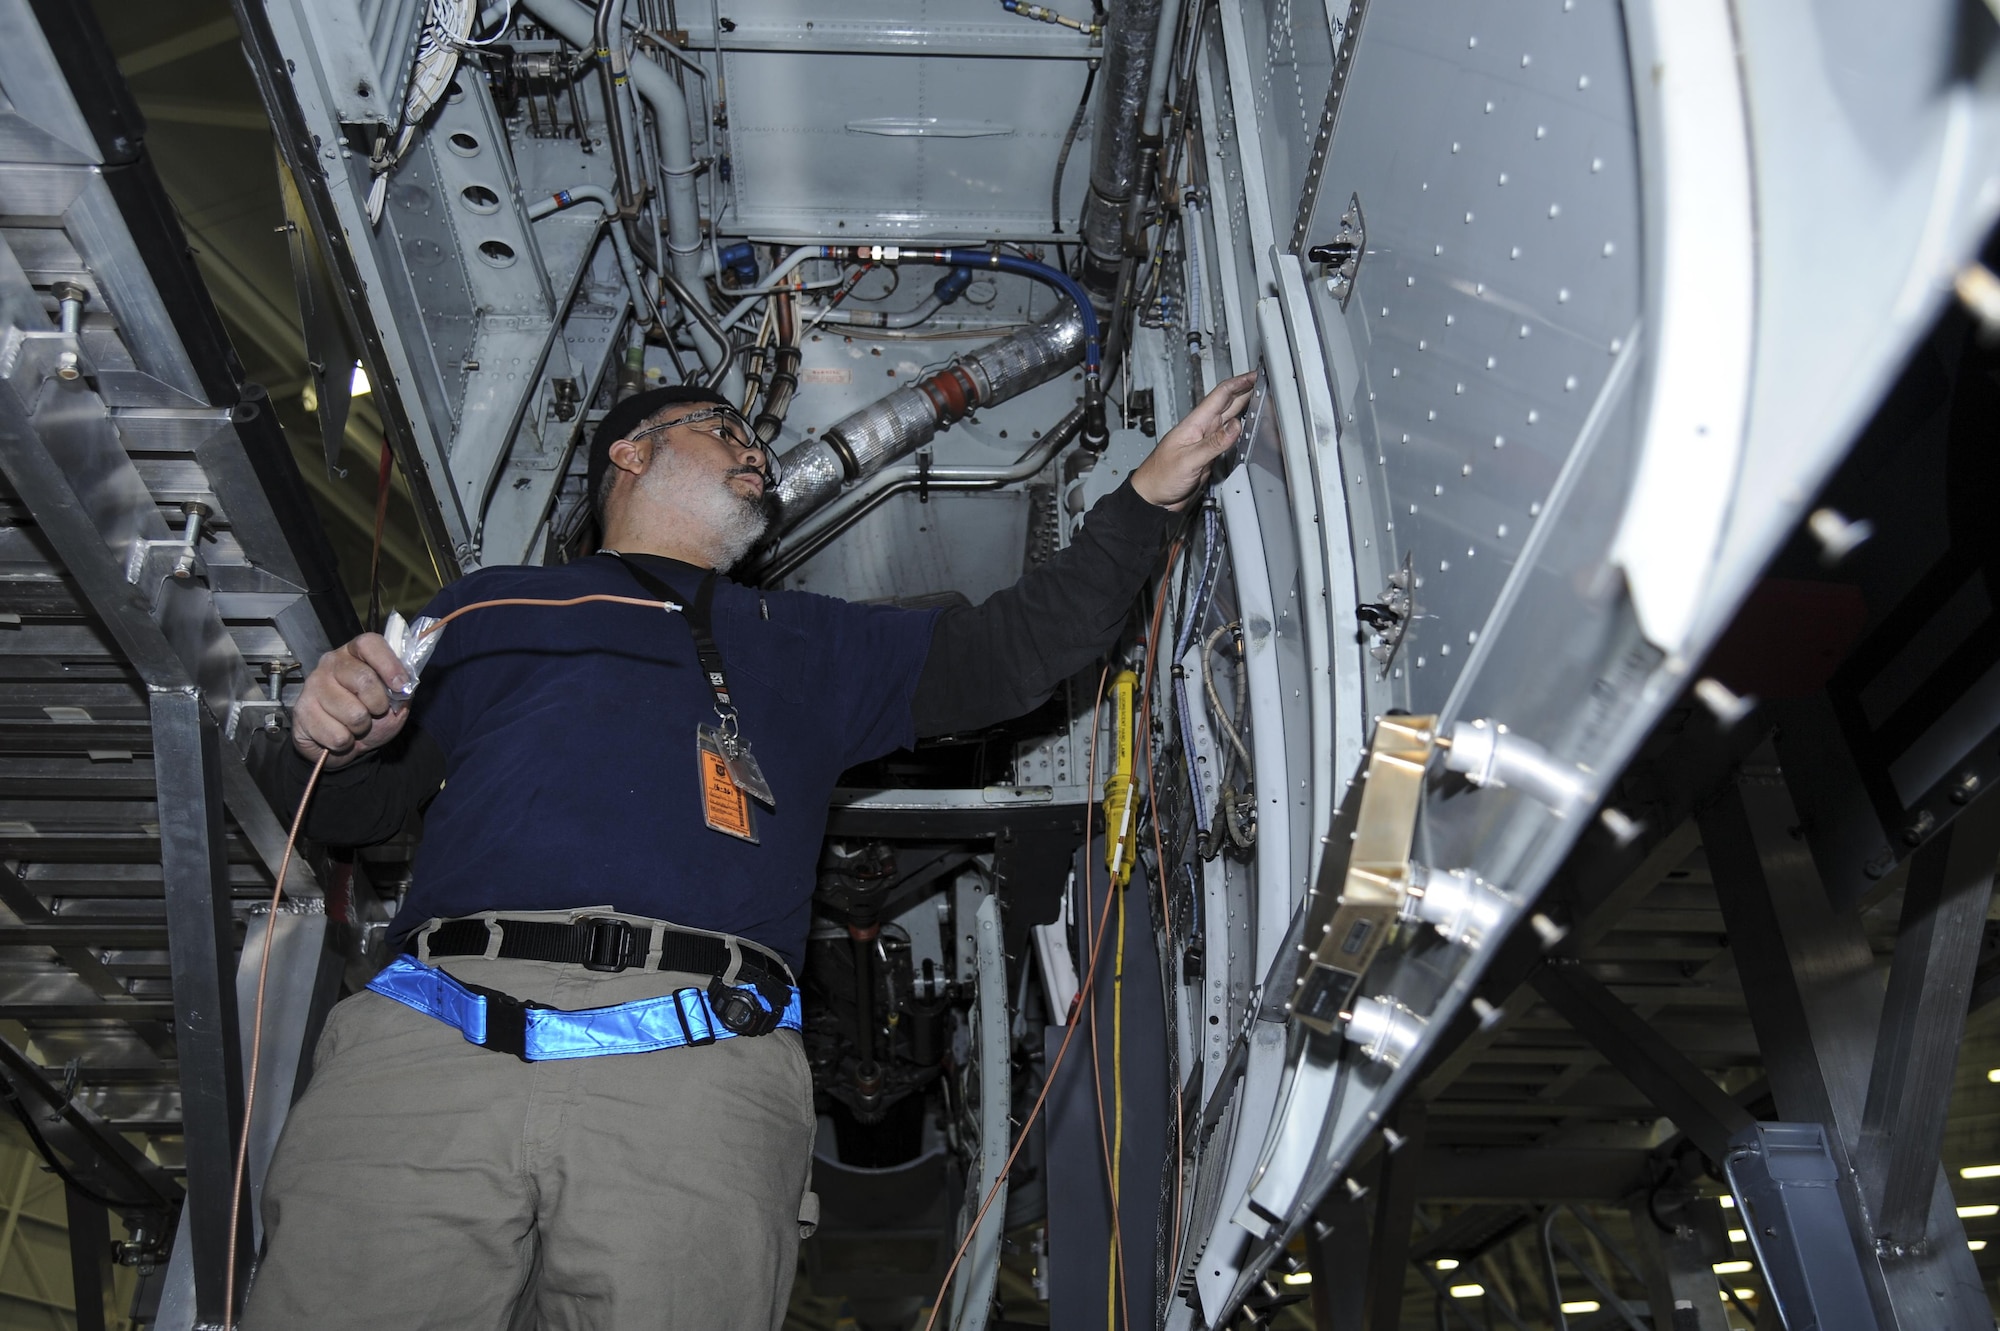 David Antrobus, 309th Aircraft Maintenance and Regeneration Group aircraft technician, installs antenna wires for a lightweight airborne recovery system into an A-10C Thunderbolt II at Davis-Monthan Air Force Base, Ariz., Dec. 5, 2016. The new LARS upgrade provides pilots with GPS coordinates to friendly ground forces and allows them to communicate via voice or text.  (U.S. Air Force photo by Airman 1st Class Mya M. Crosby)